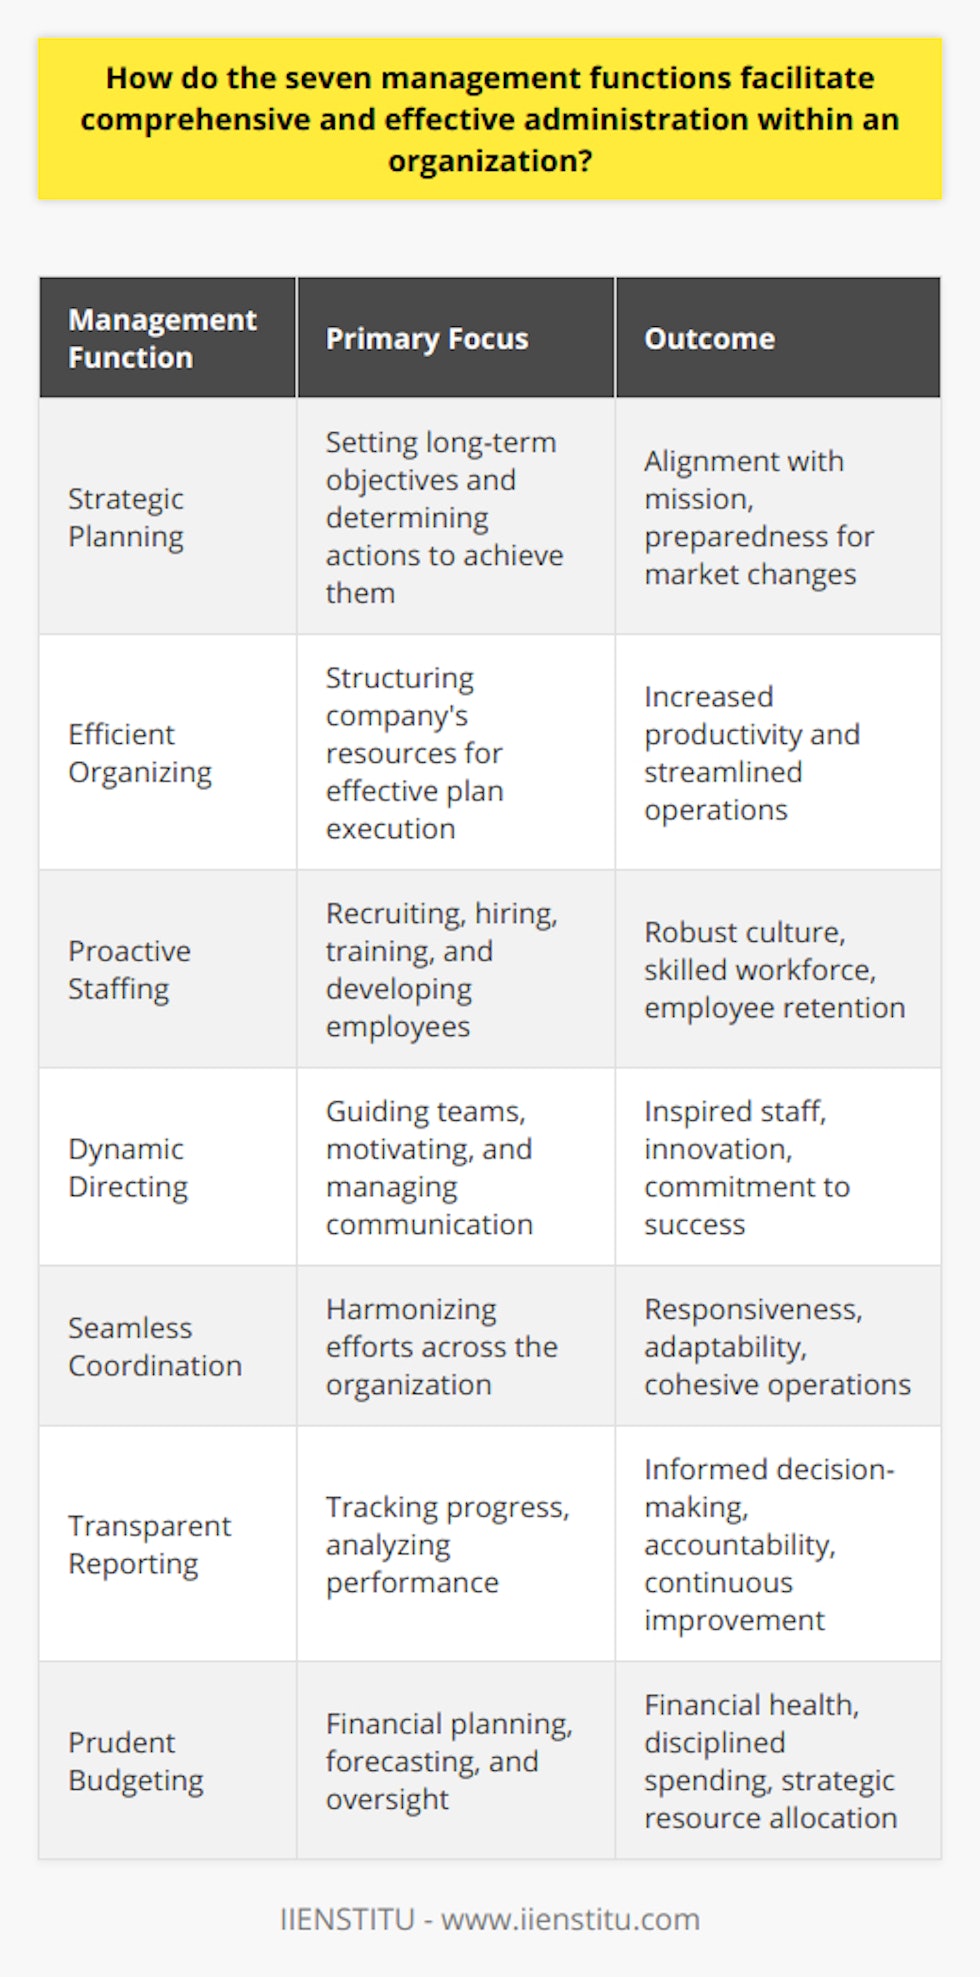 Management functions serve as the backbone of an organization, providing the necessary framework for effective administration and the achievement of strategic goals. The seven critical management functions comprise planning, organizing, staffing, directing, coordinating, reporting, and budgeting. Each of these functions plays a distinct yet interrelated role in fostering a comprehensive and well-orchestrated business environment.**Strategic Planning**Strategic planning is the foundational management function that sets the stage for all subsequent activities within the organization. It involves identifying long-term objectives and determining the best course of action to achieve them. This function necessitates foresight, analytical thinking, and a clear understanding of the organizational vision. Through strategic planning, managers can align their initiatives with the company's mission and prepare for future challenges and market changes.**Efficient Organizing**Organizing is the process of structuring and arranging the company's resources to effectively execute plans. This function entails creating an organizational chart, defining roles and responsibilities, and implementing processes that facilitate collaboration. By establishing an efficient organizational framework, management can ensure that each team member understands their tasks and how their work contributes to the larger organizational goals. This clarity reduces redundancy and enhances productivity, ultimately leading to a more streamlined operation.**Proactive Staffing**Staffing is the intricate process of recruiting, hiring, training, and developing employees. In this context, it goes beyond mere talent acquisition; it's about building a robust organizational culture that values skill development and embraces diversity. Effective staffing enables organizations to address their current needs and also equips them with the workforce capable of driving future growth. This function plays a significant role in employee retention and fostering a competitive edge in the market.**Dynamic Directing**Directing is the active management function where leaders guide their teams through day-to-day activities and towards the achievement of corporate objectives. This function involves motivating employees, managing team dynamics, and establishing effective communication channels. Through strong directing, managers can inspire their staff, encourage creativity and innovation, and maintain a high level of energy and commitment towards the organization's success.**Seamless Coordination**Coordination is crucial for ensuring that all parts of the organization work together harmoniously toward common goals. It encompasses synchronizing different departments, harmonizing individual efforts, and avoiding duplication of work. Effective coordination is achieved through clear communication, well-defined processes, and a collaborative culture. Coordination enhances responsiveness and adaptability, enabling the organization to operate as a cohesive unit.**Transparent Reporting**Reporting is the function that deals with tracking progress, analyzing performance, and communicating outcomes. It is essential for monitoring the efficacy of strategies and for making informed adjustments. Reporting provides a factual basis for decision-making and ensures that all stakeholders are aware of the organization’s achievements and areas that need attention. This management function upholds accountability and contributes to continuous improvement within the organization.**Prudent Budgeting**Budgeting is the final piece of the management function puzzle, focusing on the financial planning, forecasting, and oversight of the organization. Effective budgeting controls expenditures, identifies potential savings, and allocates resources for strategic initiatives. It is a predictive tool that prepares the organization for future financial scenarios and helps in maintaining financial discipline. Budgeting is instrumental in safeguarding the financial health and sustainability of the company.In closing, the seven management functions interlock to create a comprehensive framework for effective administration. They allow managers to navigate an organization towards success through strategic alignment, resource optimization, talent management, leadership, collaboration, accountability, and financial stewardship. Together, these functions form the vital arteries of an organization, enabling it to thrive amidst competitive markets and evolving business landscapes.